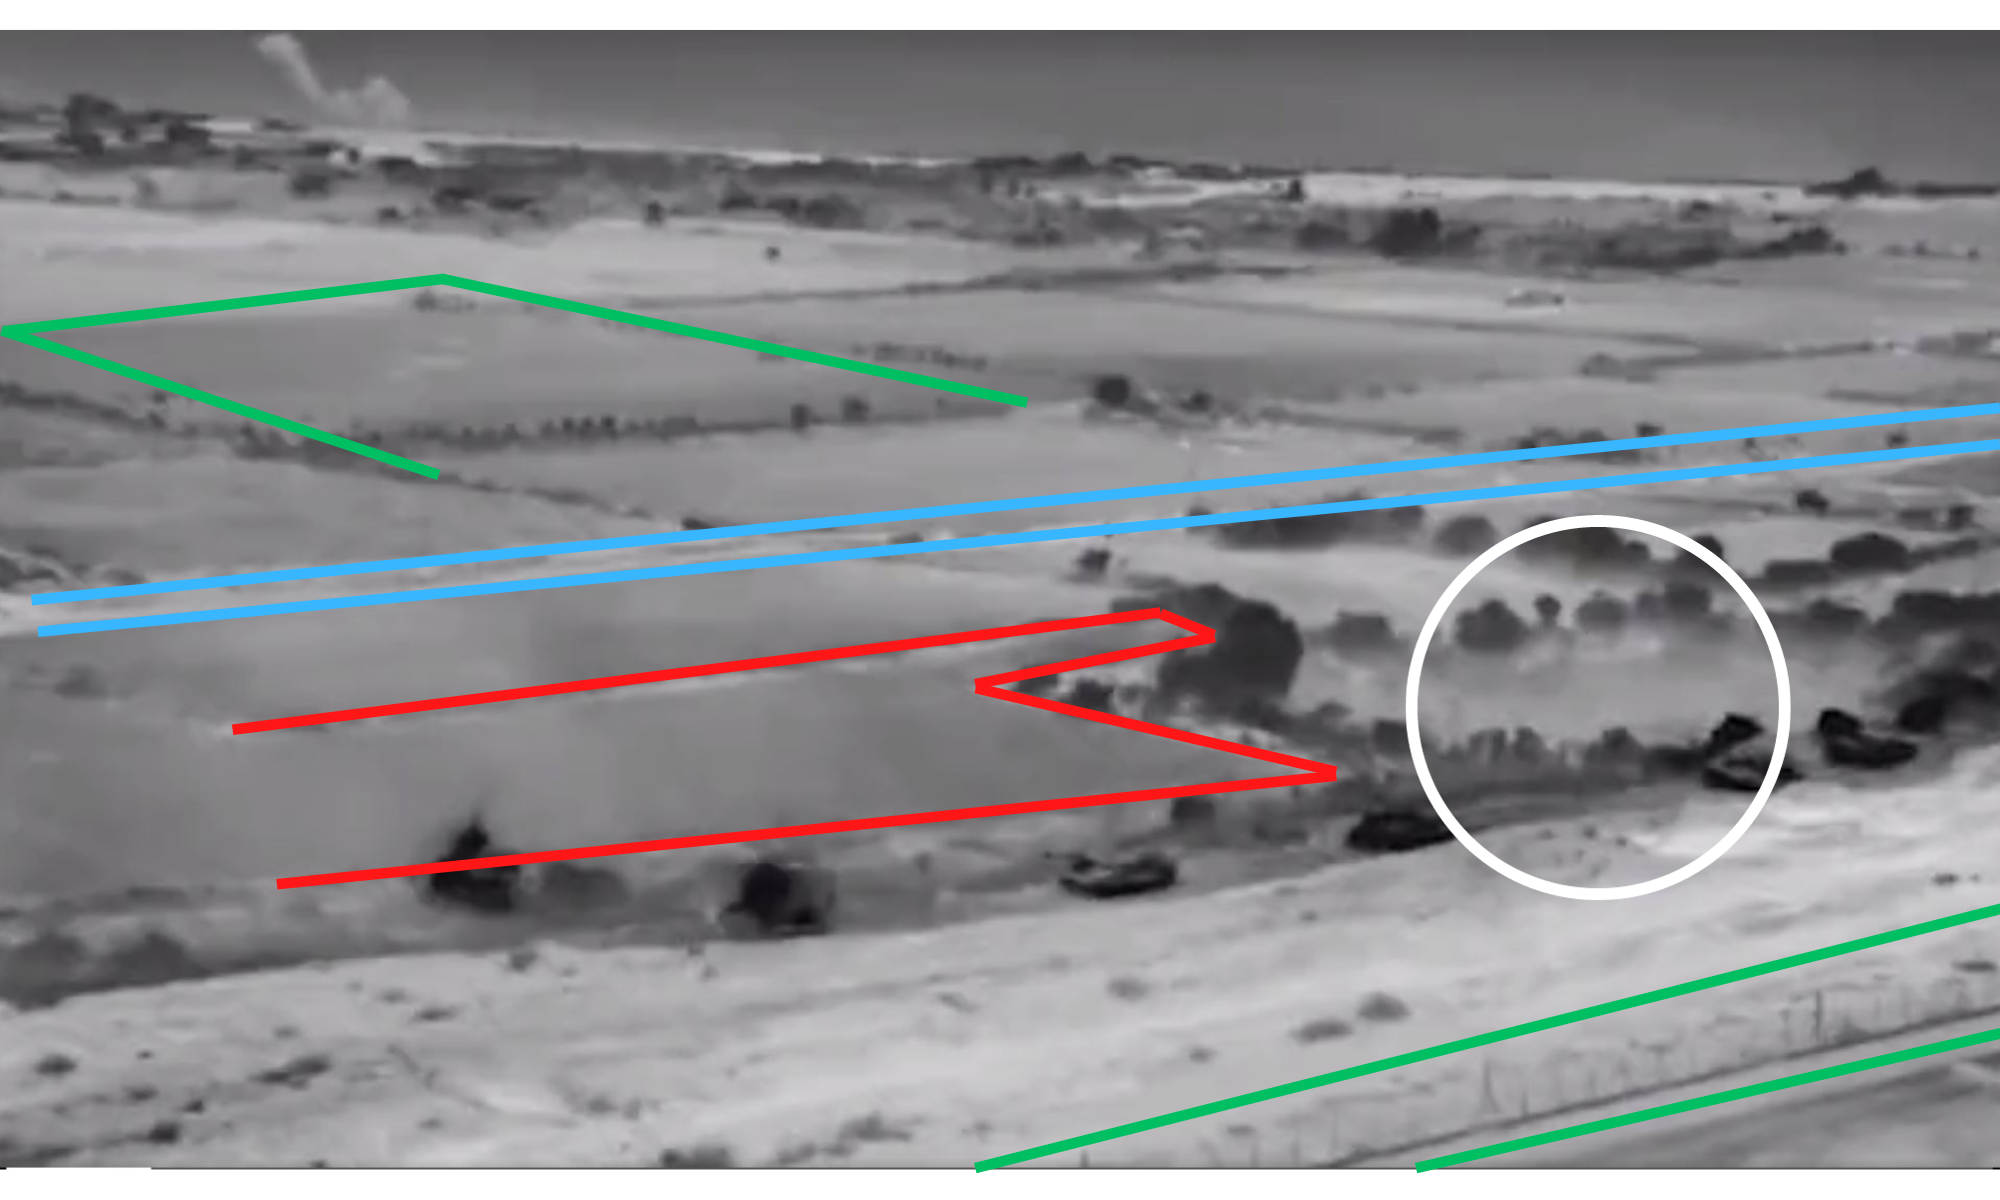 Elements that allowed us to geolocate this scene showing a convoy of Israeli armored vehicles entering the Gaza Strip.